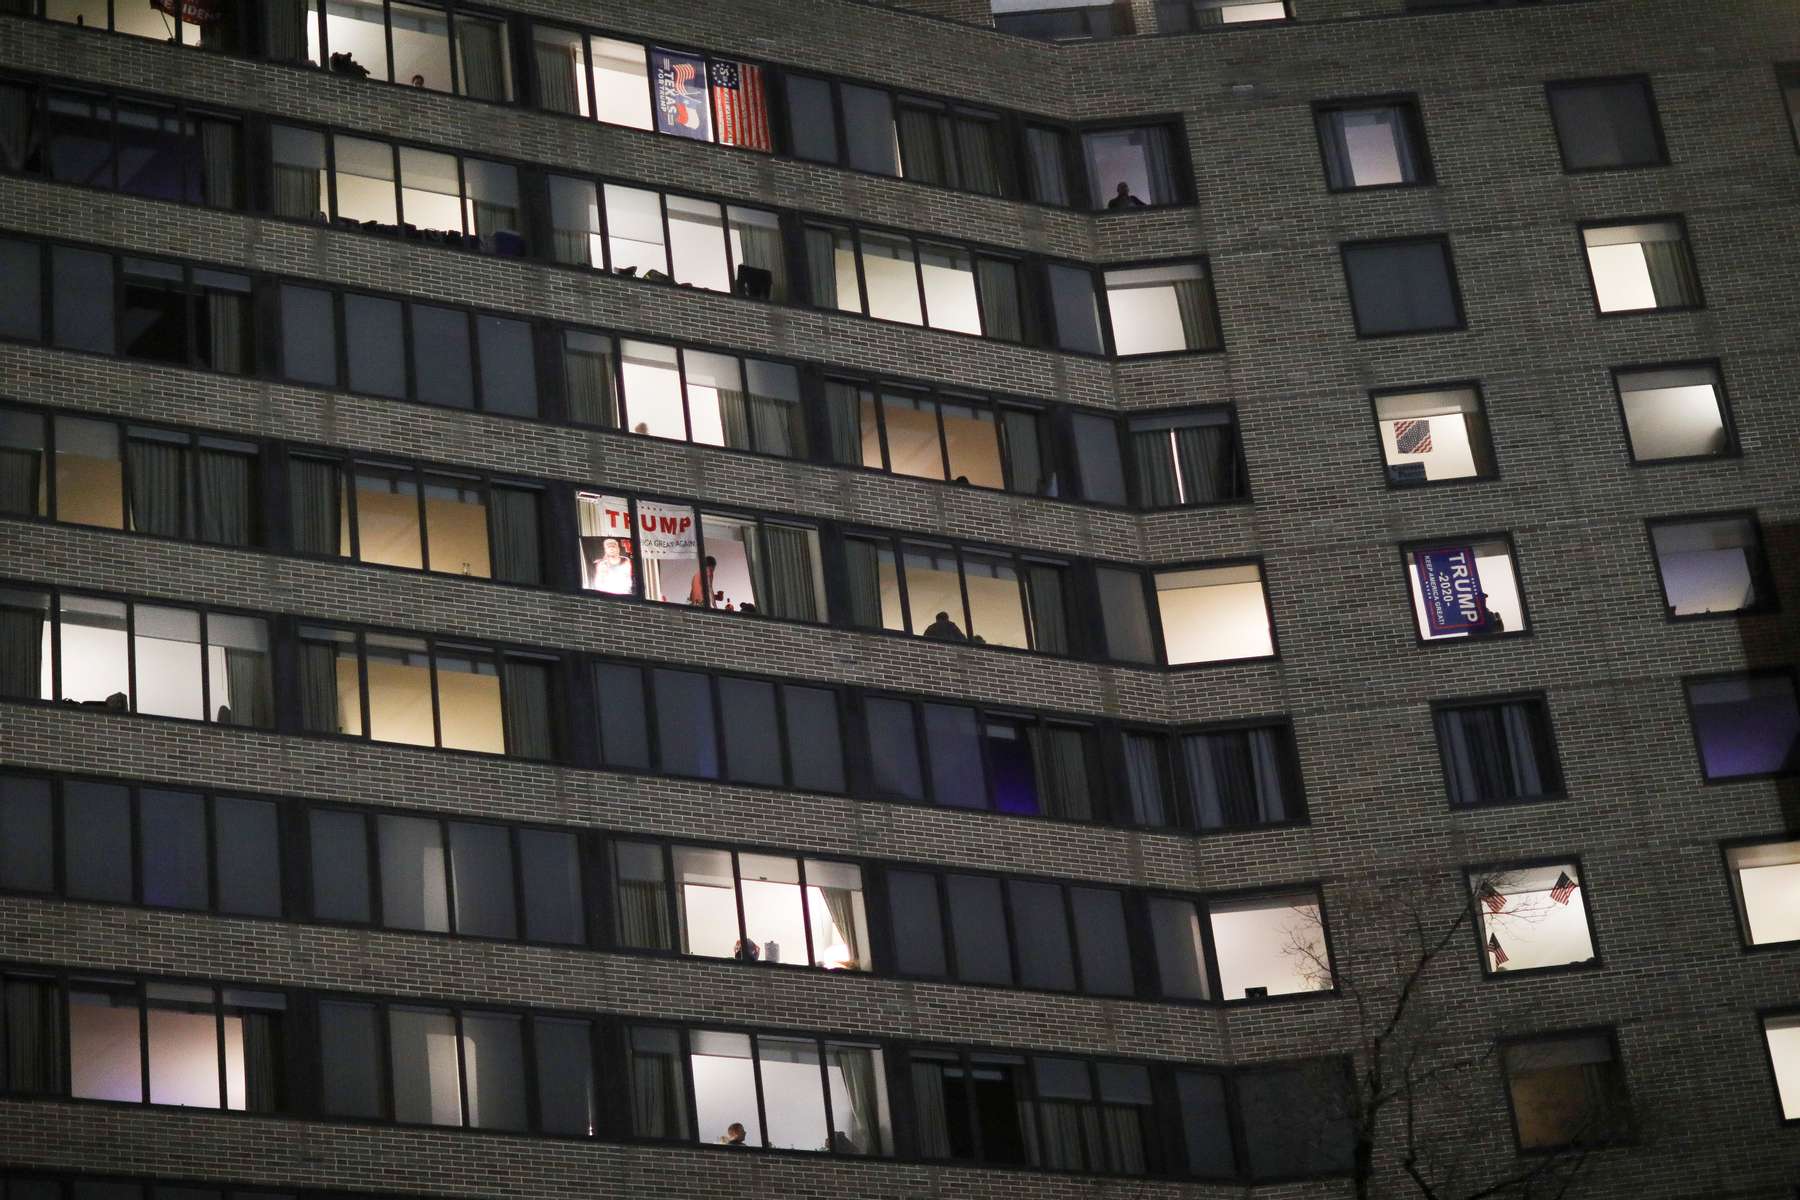 Supporters of U.S. President Donald Trump can be seen in the windows of their hotel rooms as fellow supporters hold a rally in Freedom Plaza near the White House, ahead of the U.S. Congress certification of the November 2020 election results during protests in Washington, U.S., January 5, 2021. 